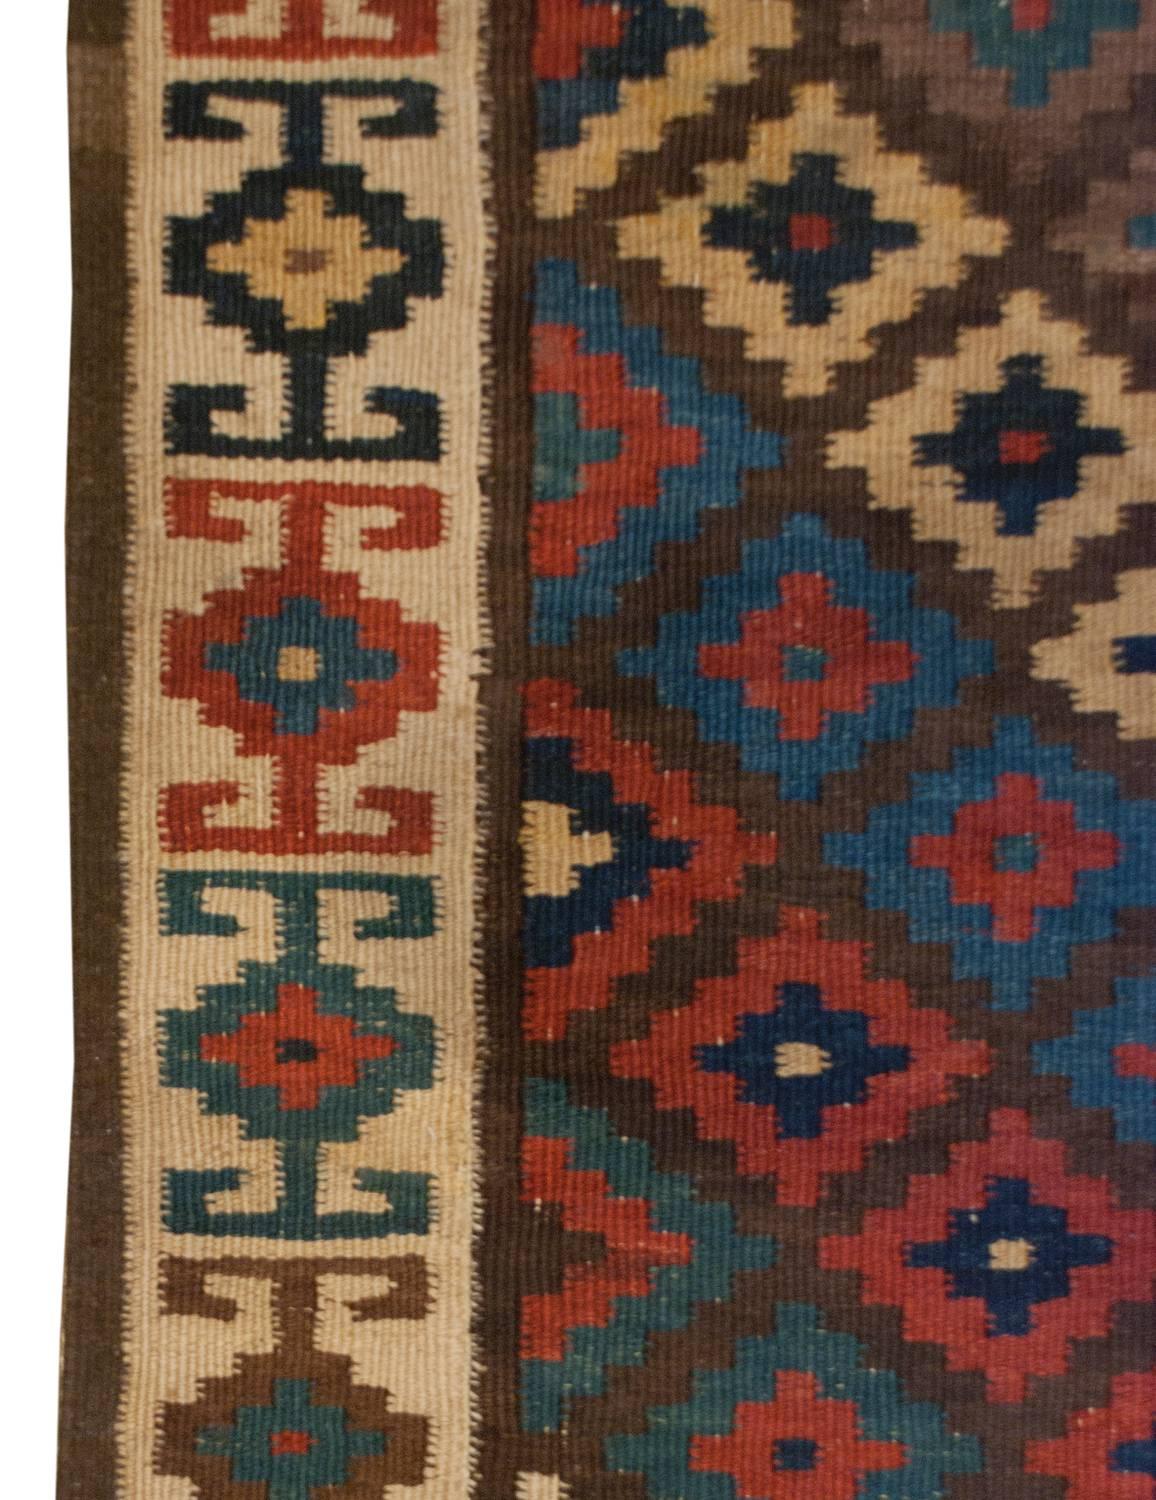 A wonderful early 20th century Persian Saveh Kilim runner with a beautiful central field composed of a multicolored chevron stripe woven in crimson, indigo, green, yellow, white, and brown wool. The border is complementary with a multicolored